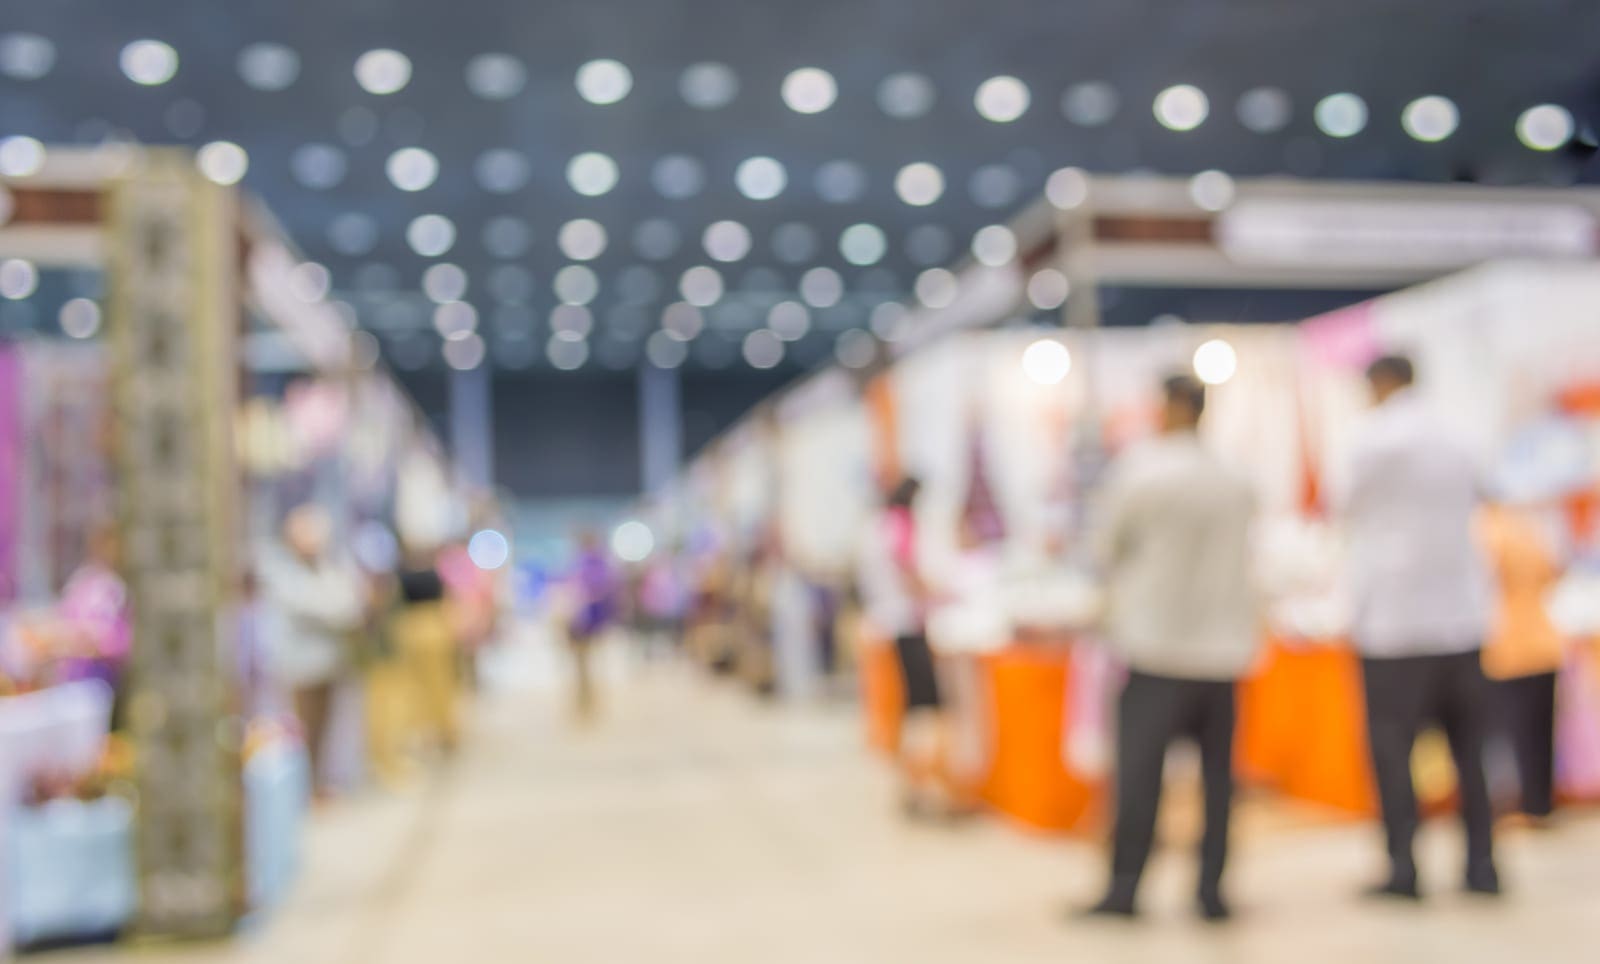 a blurry image of a trade show floor